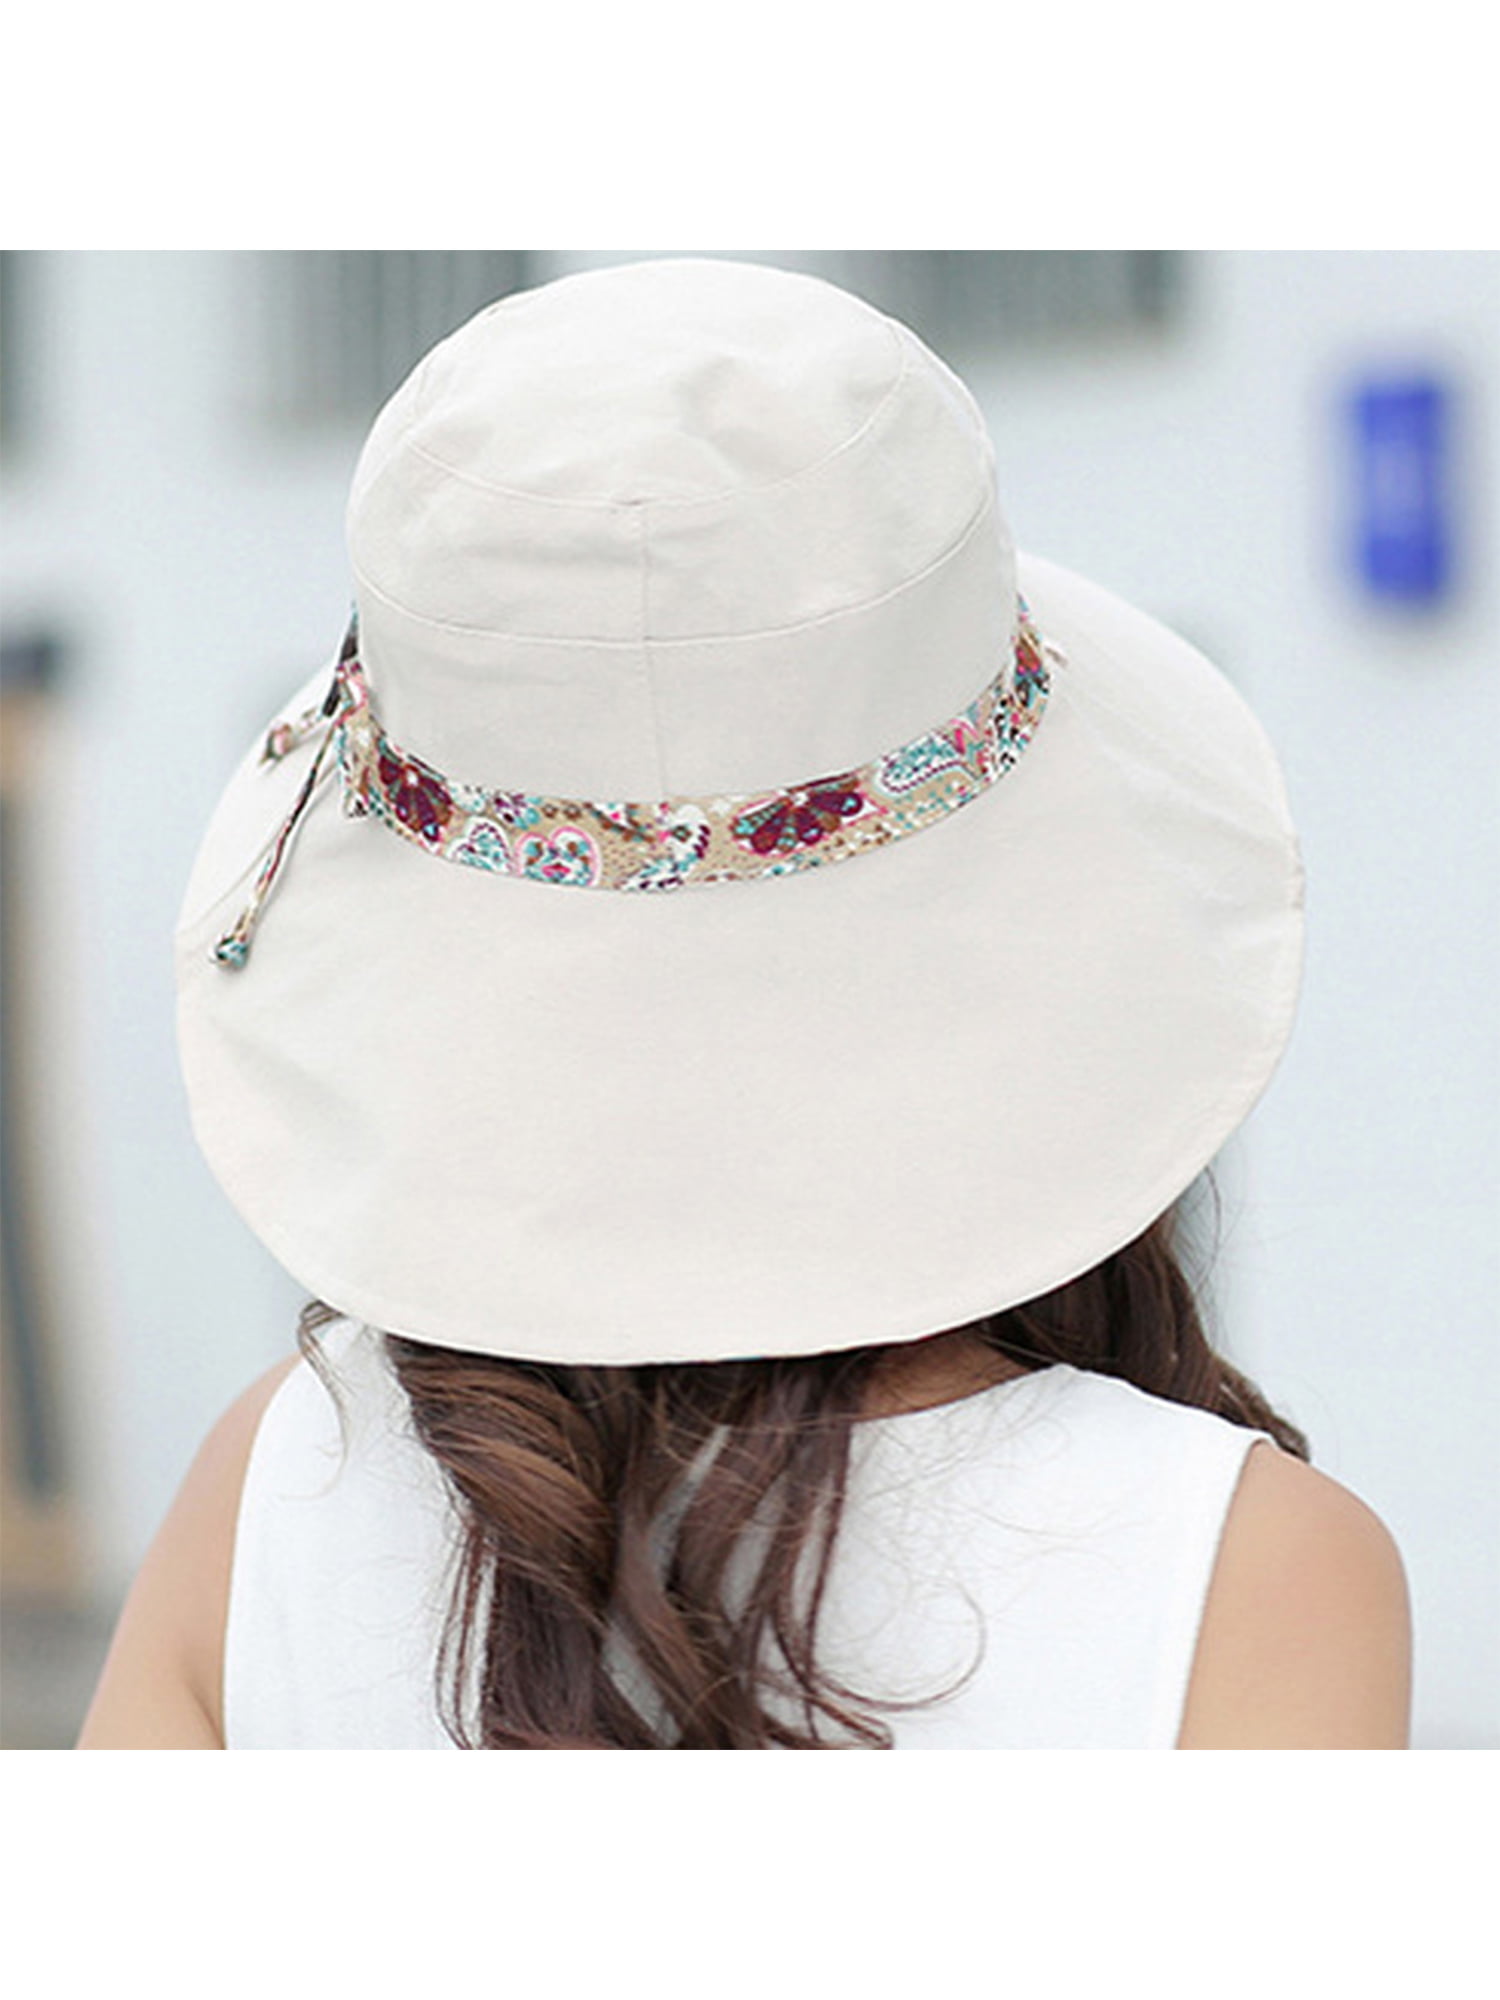 XL Wide Brim Blackpink Bucket Hat With Double Sided Floral Design For Men  And Women Perfect For Summer Casual Street Style And Sun Protection From  Huan05, $11.39